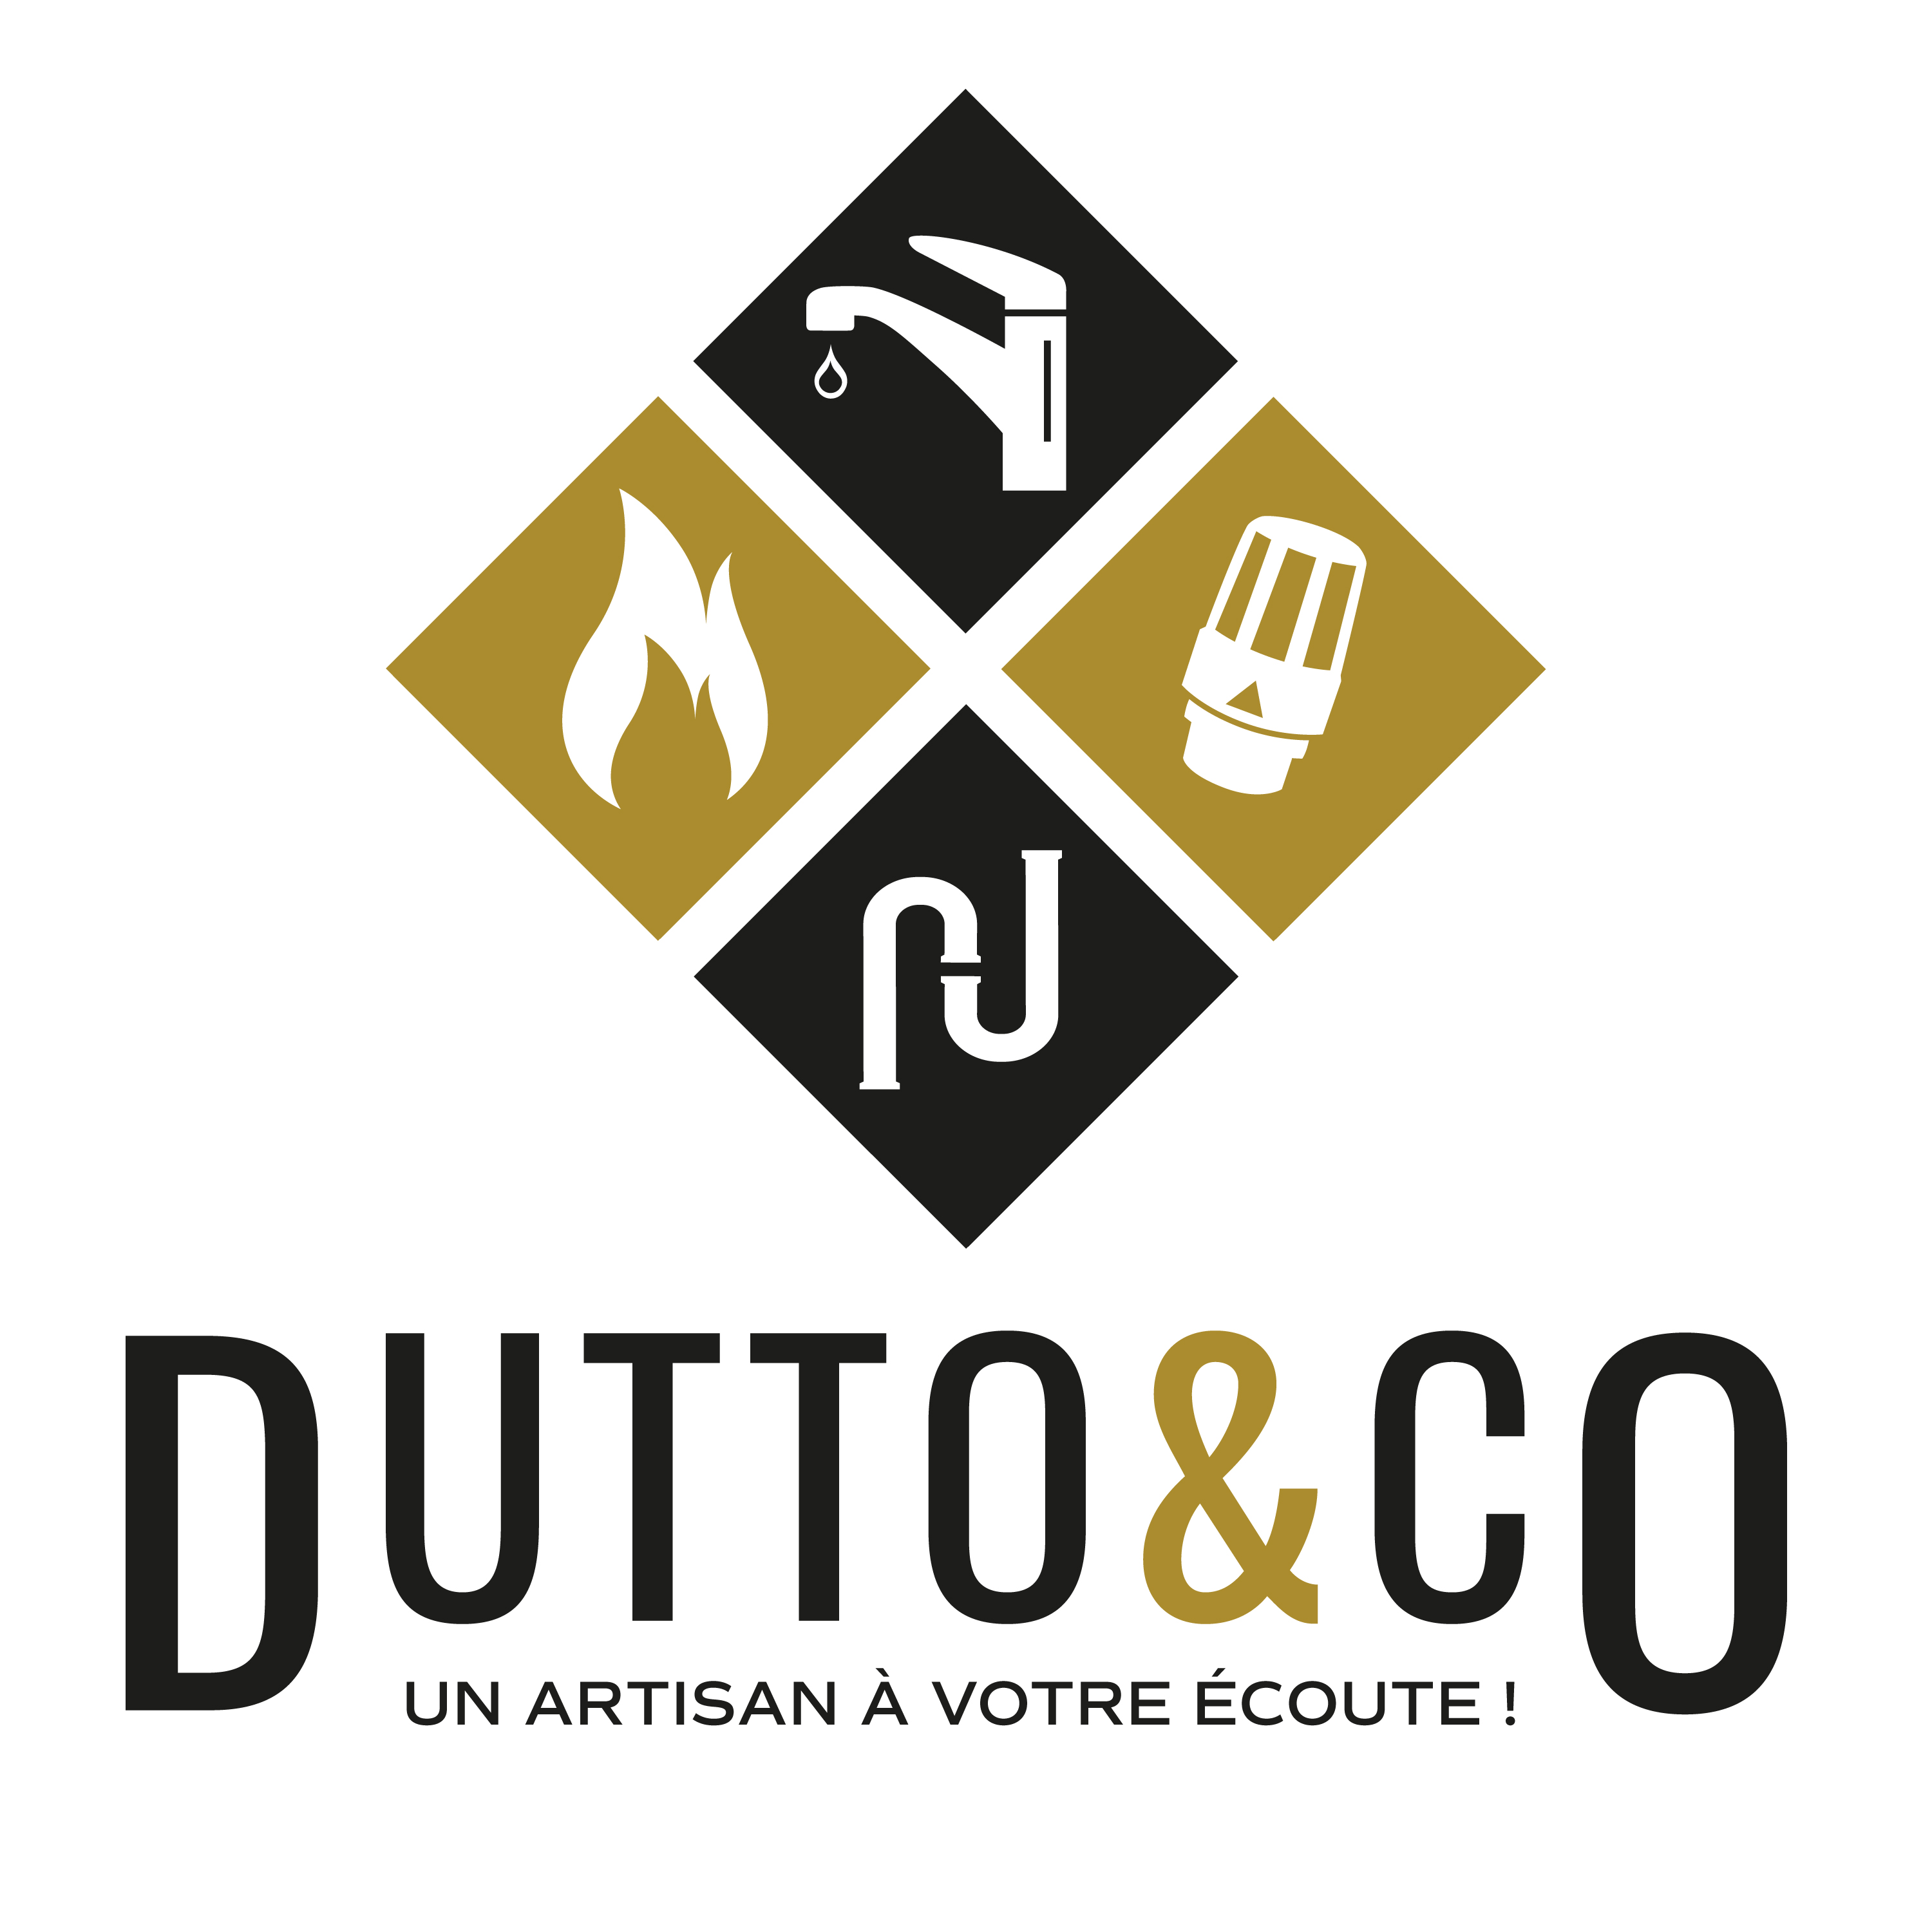 Dutto and co